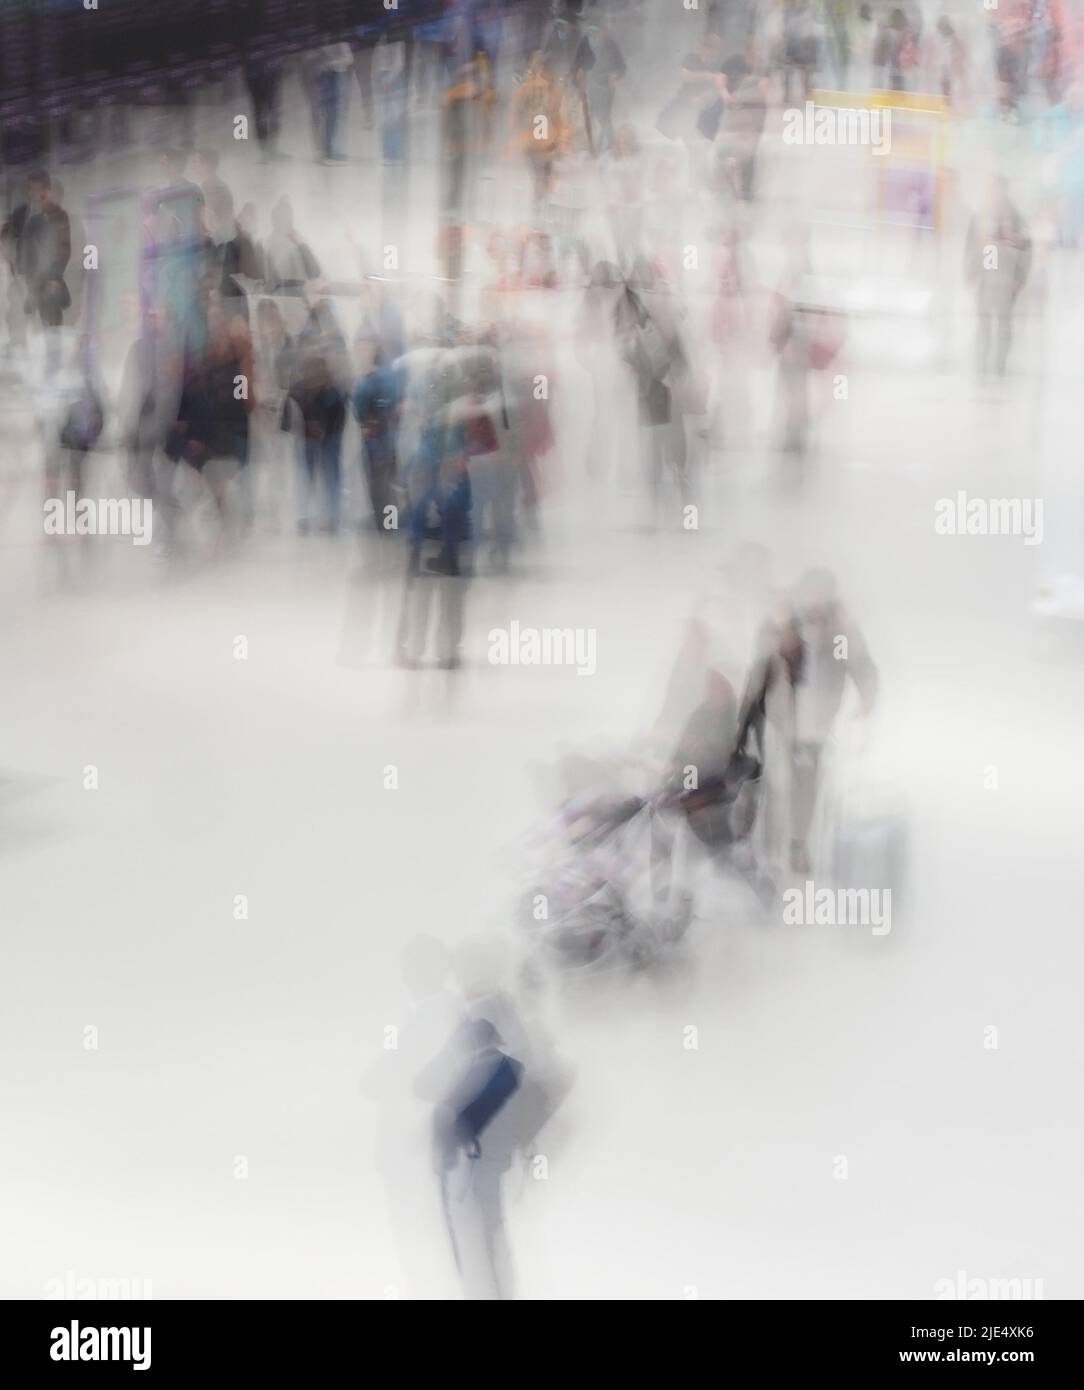 Semiabstract picture of a crowd of people blurred and unrecognisable Stock Photo